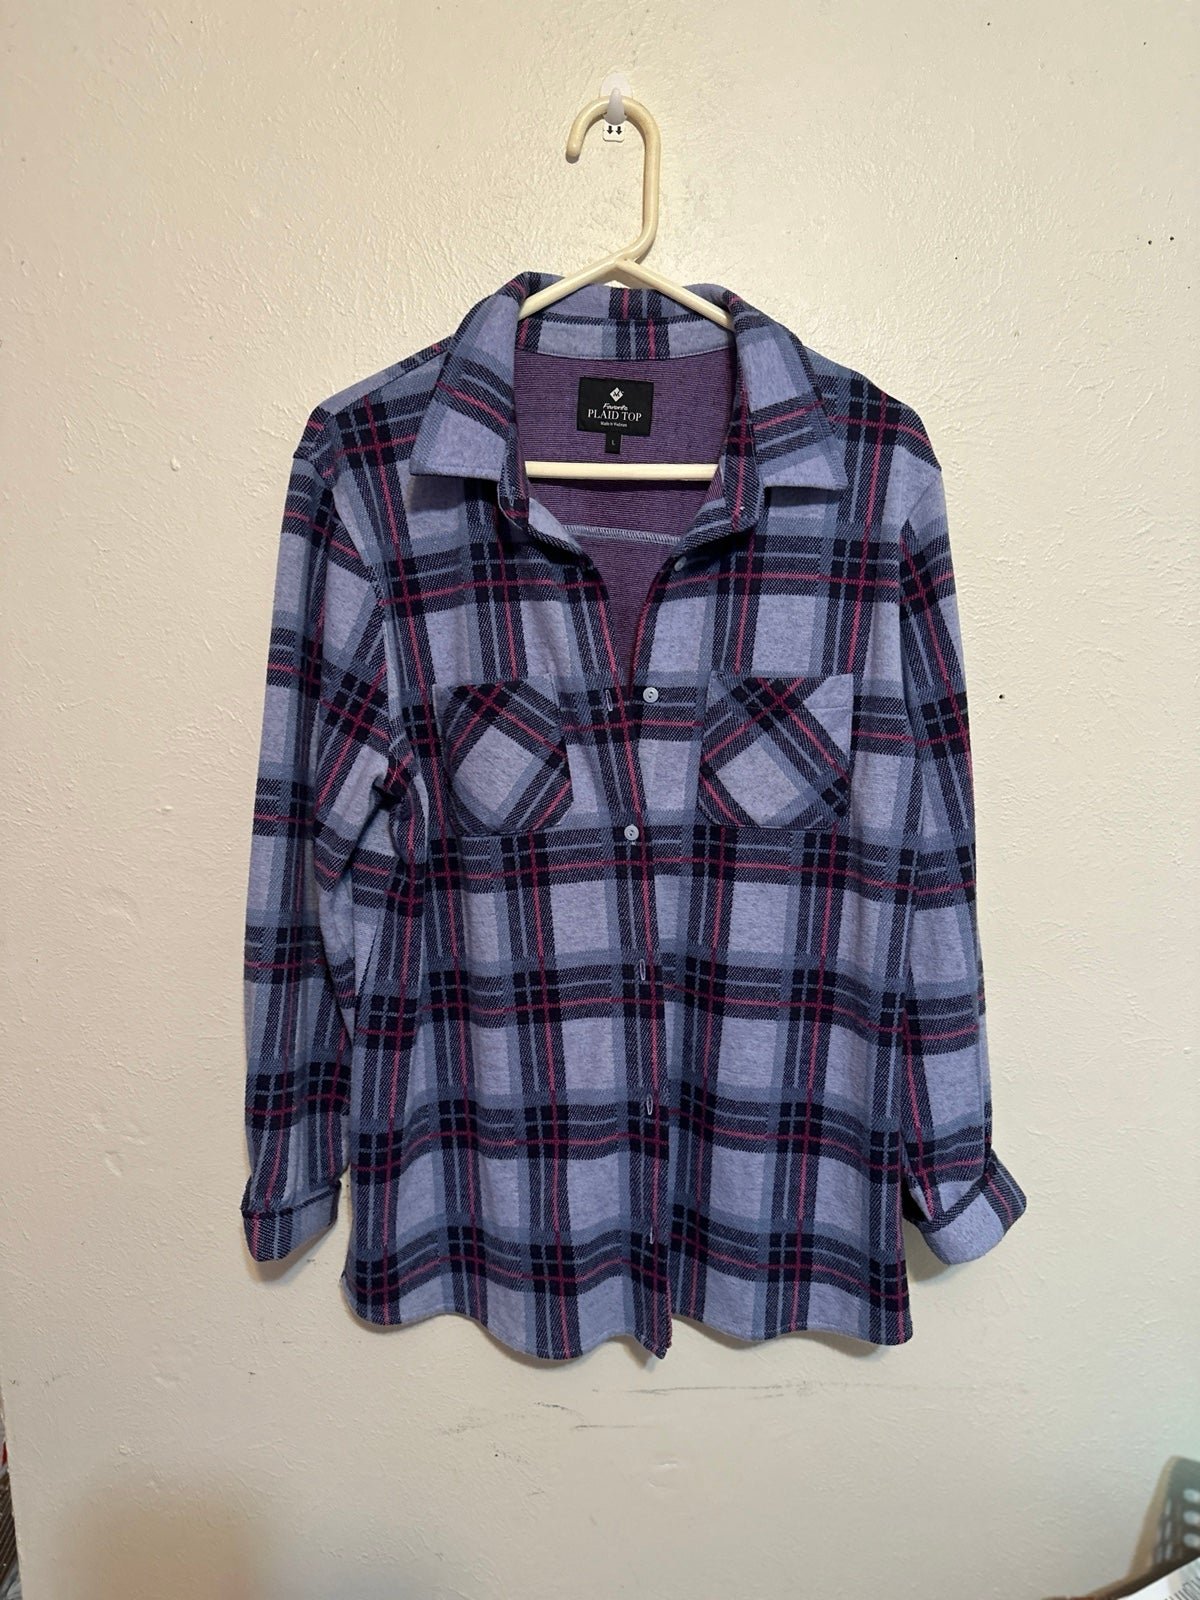 Popular Favorite Plaid Top Blue Pink Plaid Front Pockets Button Down Fleece Shirt L NJPExER0w Everyday Low Prices